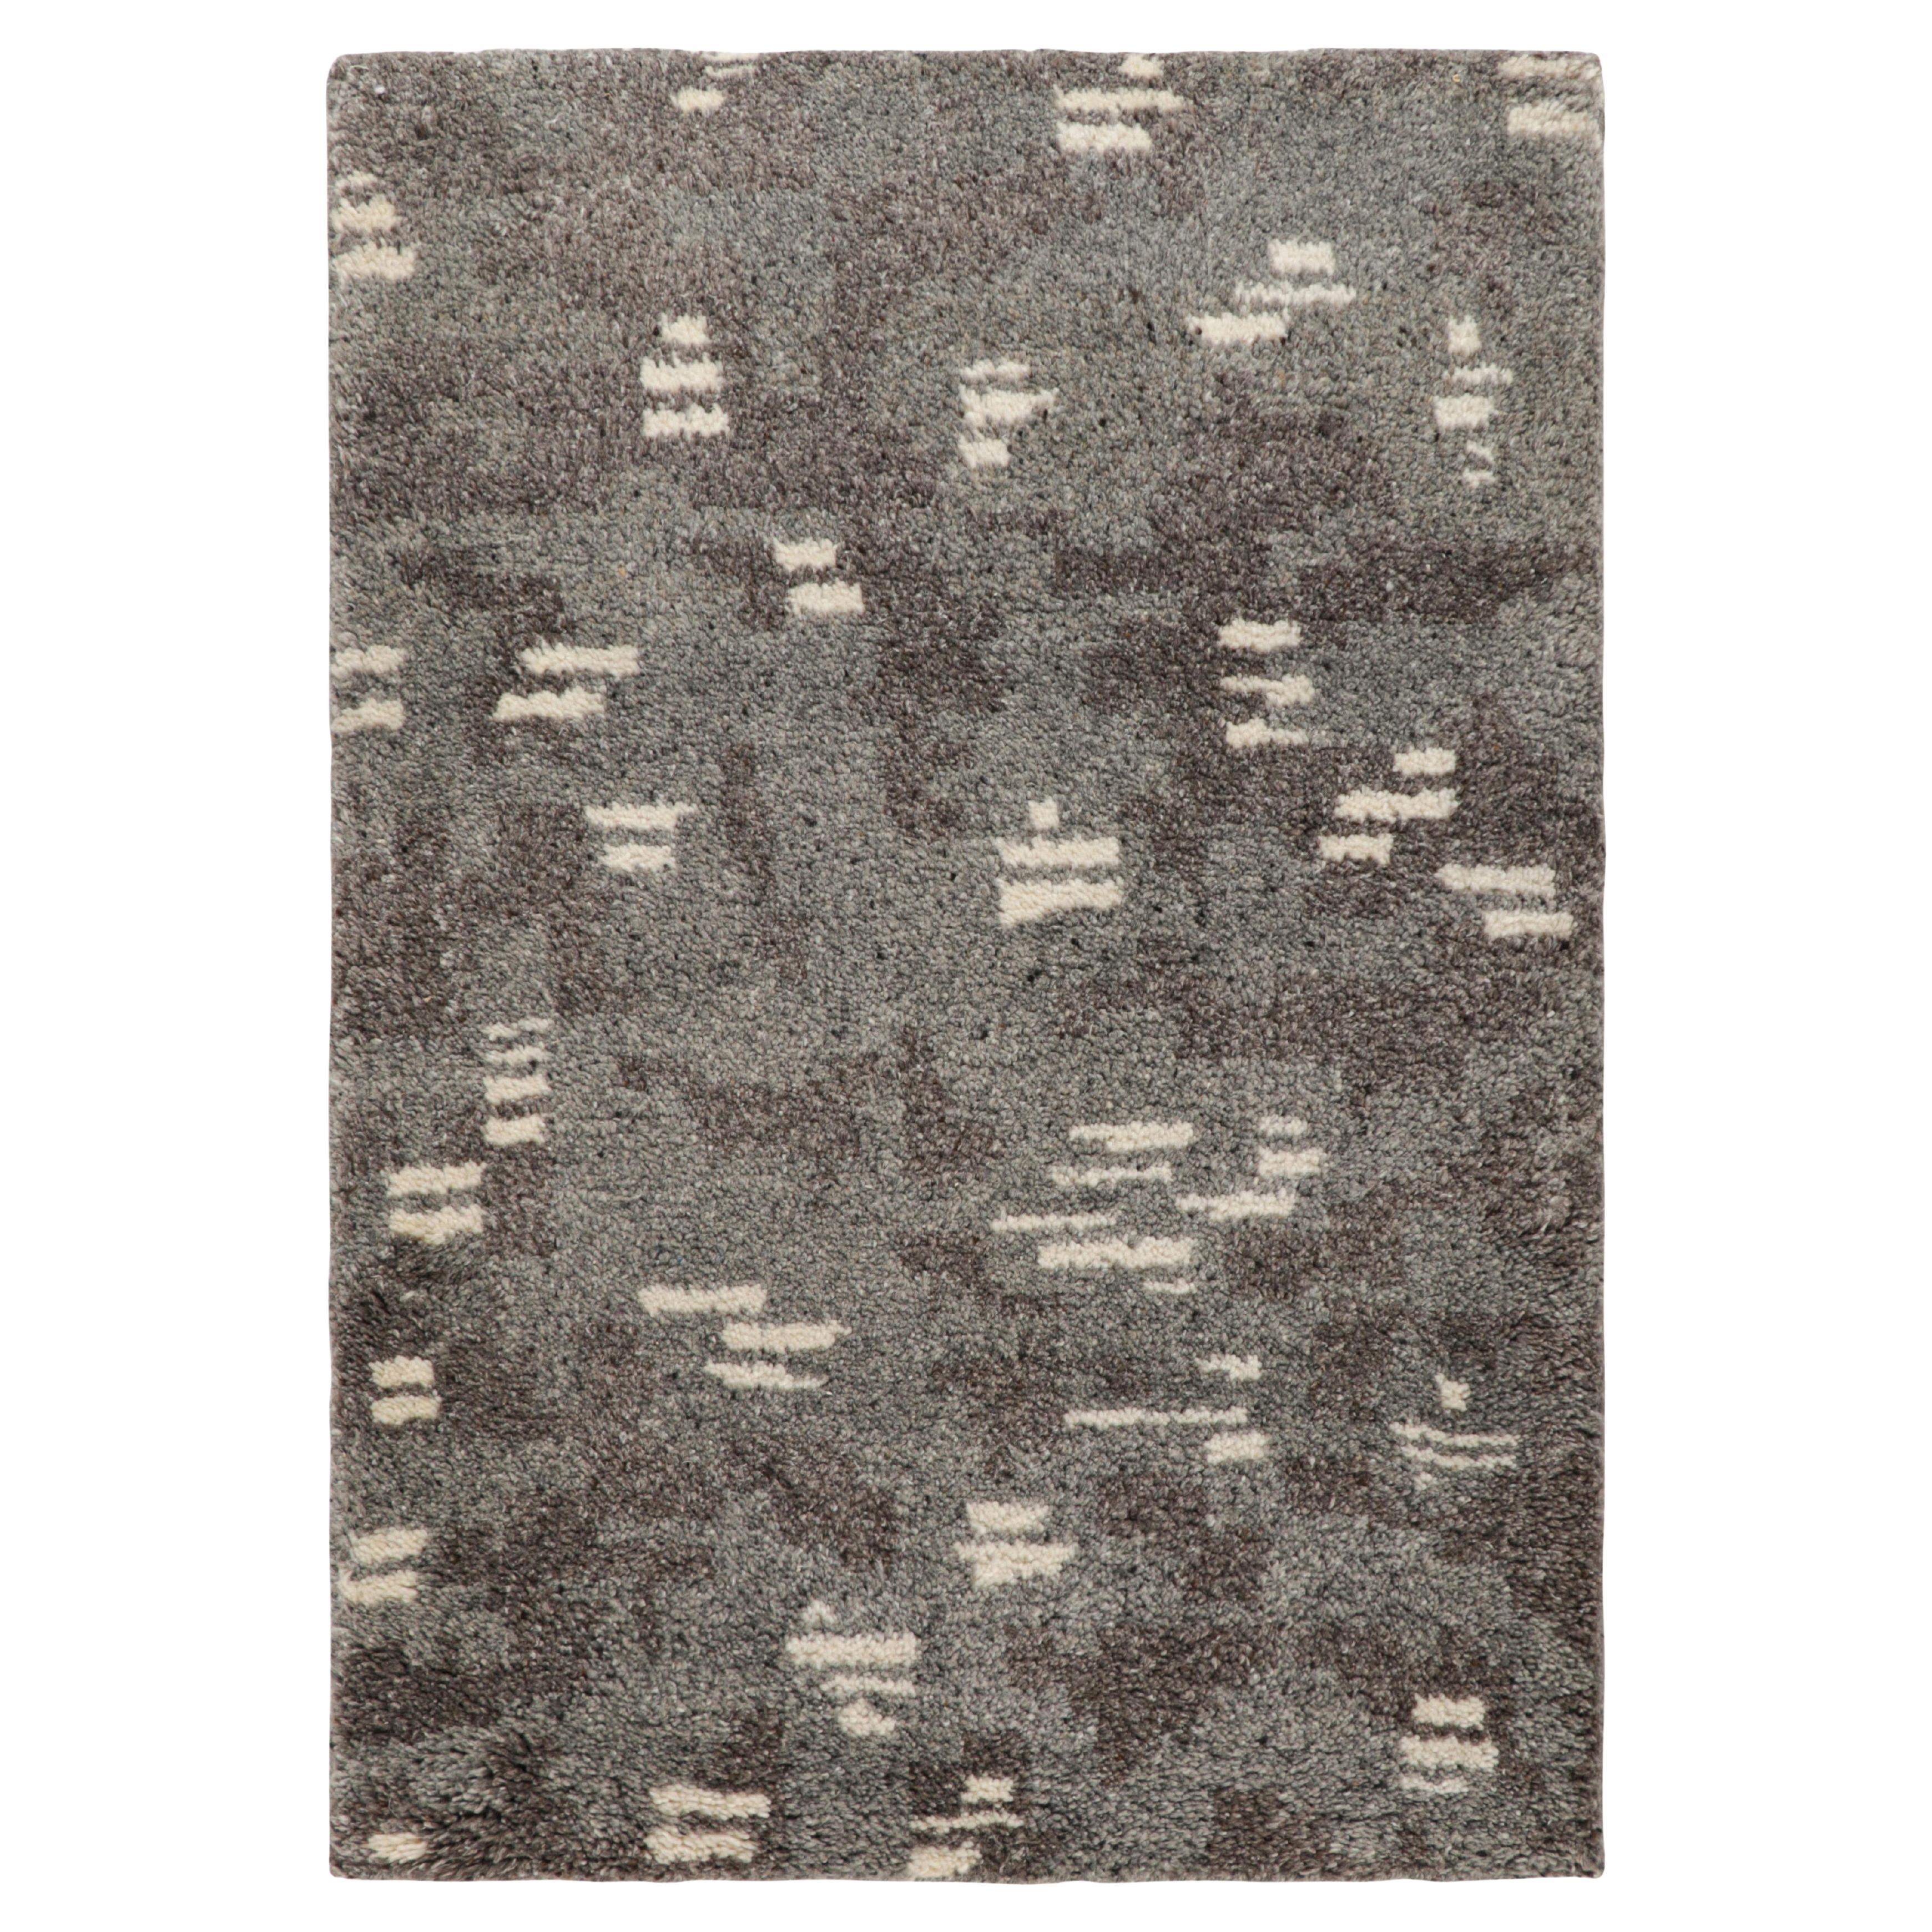 Rug & Kilim’s Modern Rug in Charcoal Gray with White Geometric Patterns For Sale